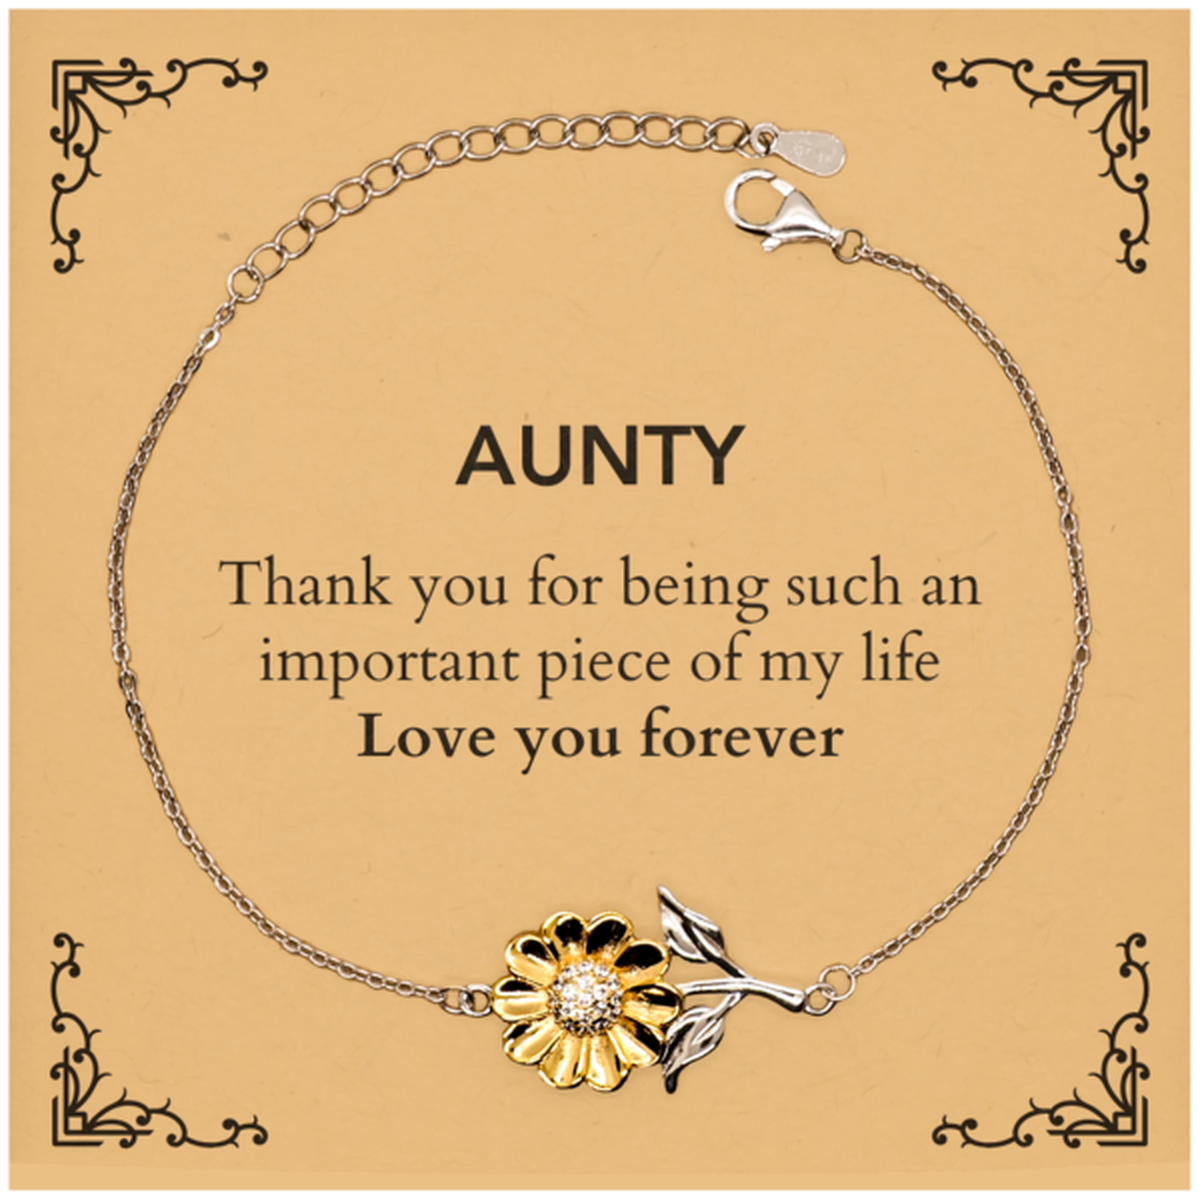 Appropriate Aunty Sunflower Bracelet Epic Birthday Gifts for Aunty Thank you for being such an important piece of my life Aunty Christmas Mothers Fathers Day